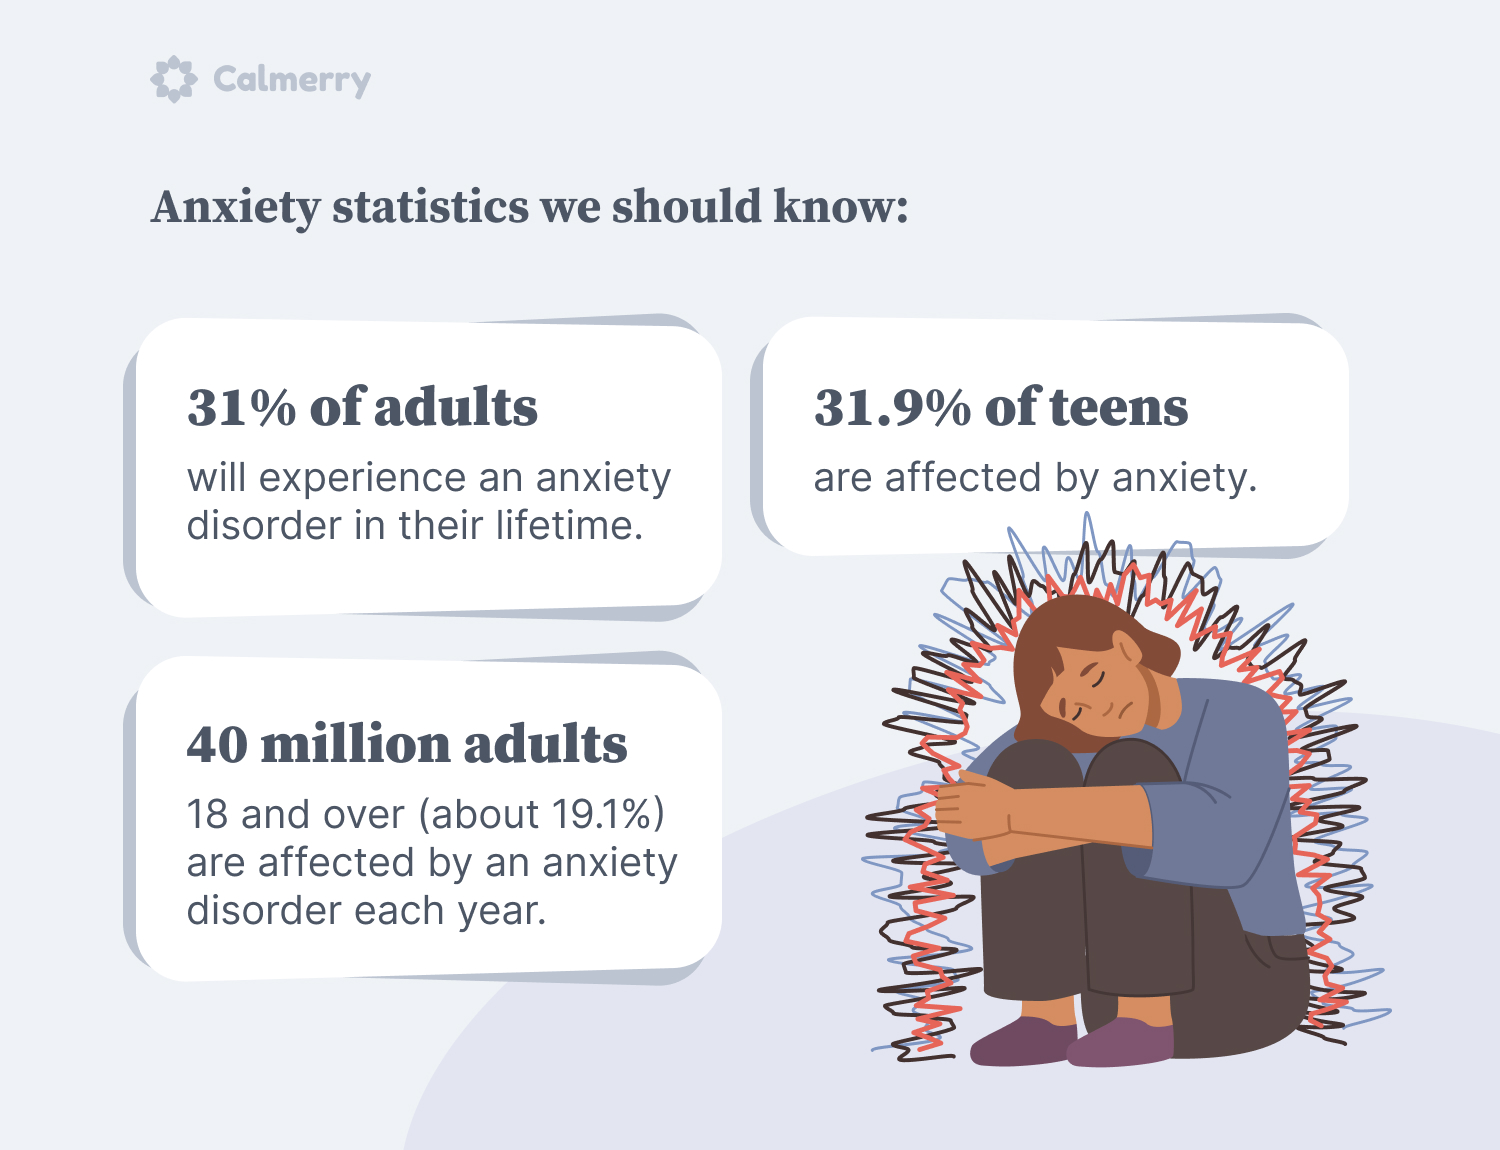 Anxiety statistics: 31% of adults will experience an anxiety disorder in their lifetime. 40 million adults 18 and over (about 19.1%) are affected by an anxiety disorder each year. 31.9% of teens are affected by anxiety.